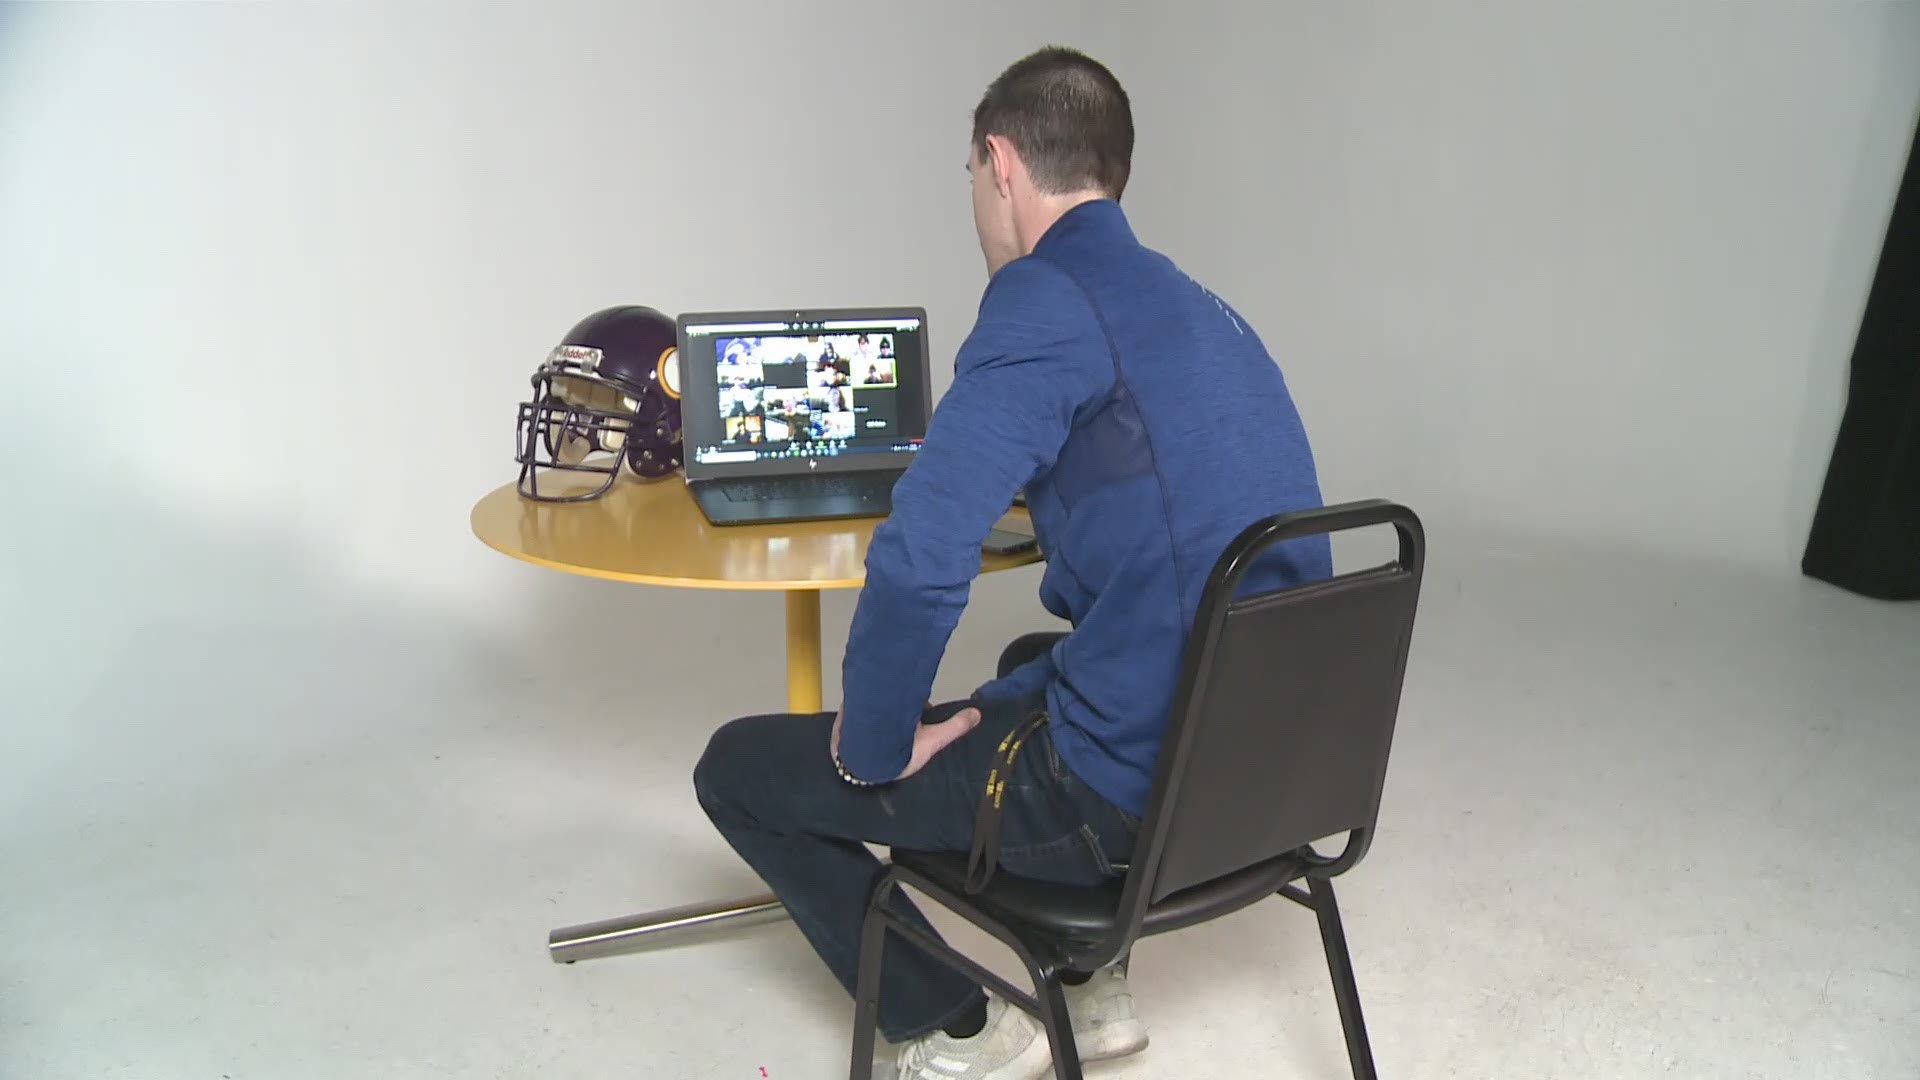 It’s a new era, with fans eager to learn of the newest member of the Vikings even if it was in a virtual setting.